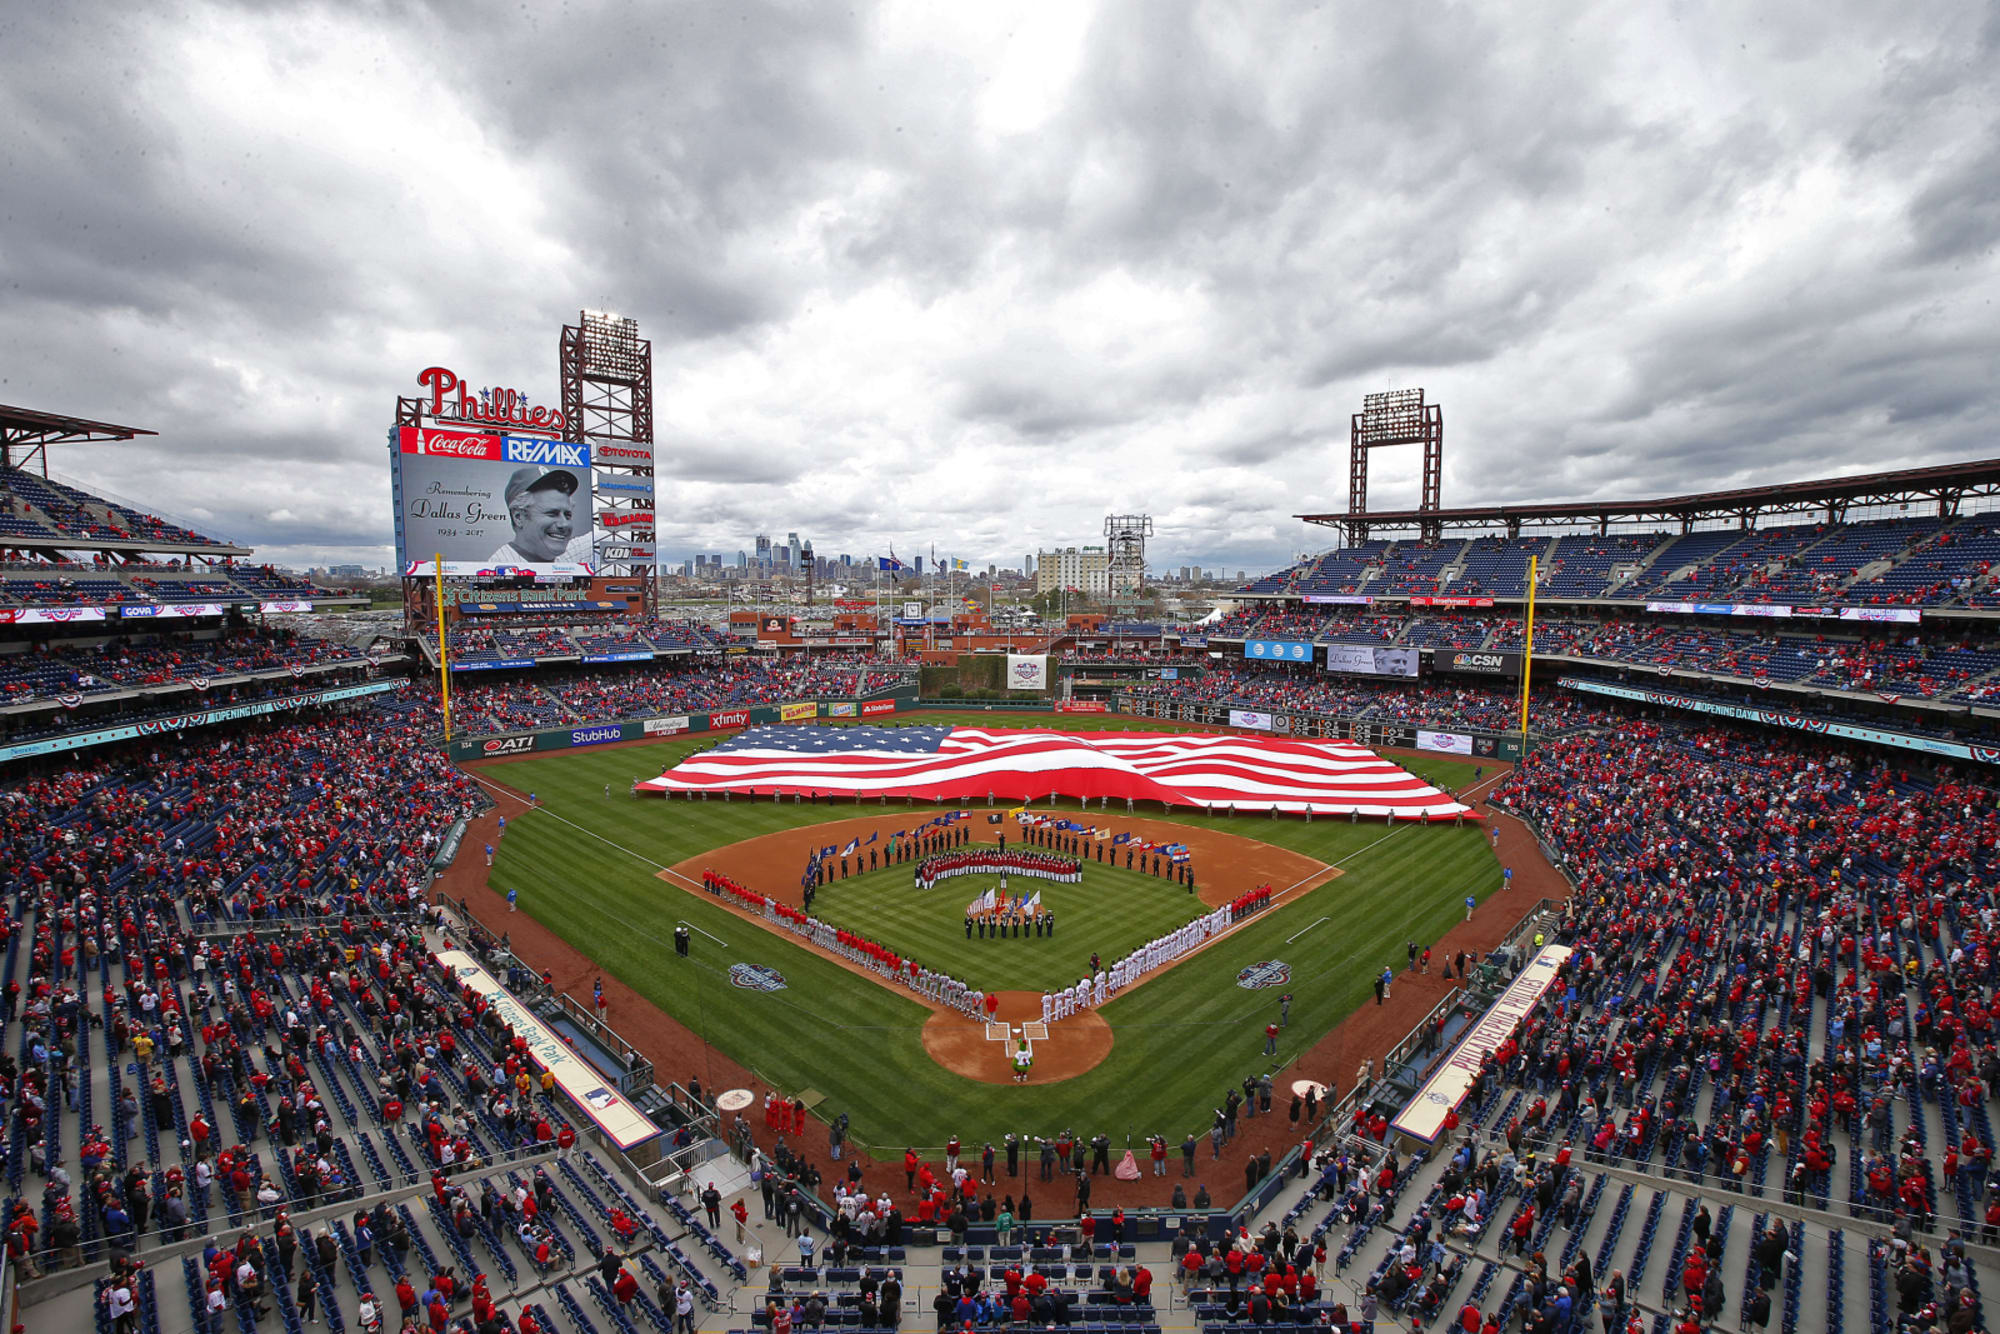 Philadelphia Phillies The 2020 home opener that would have been